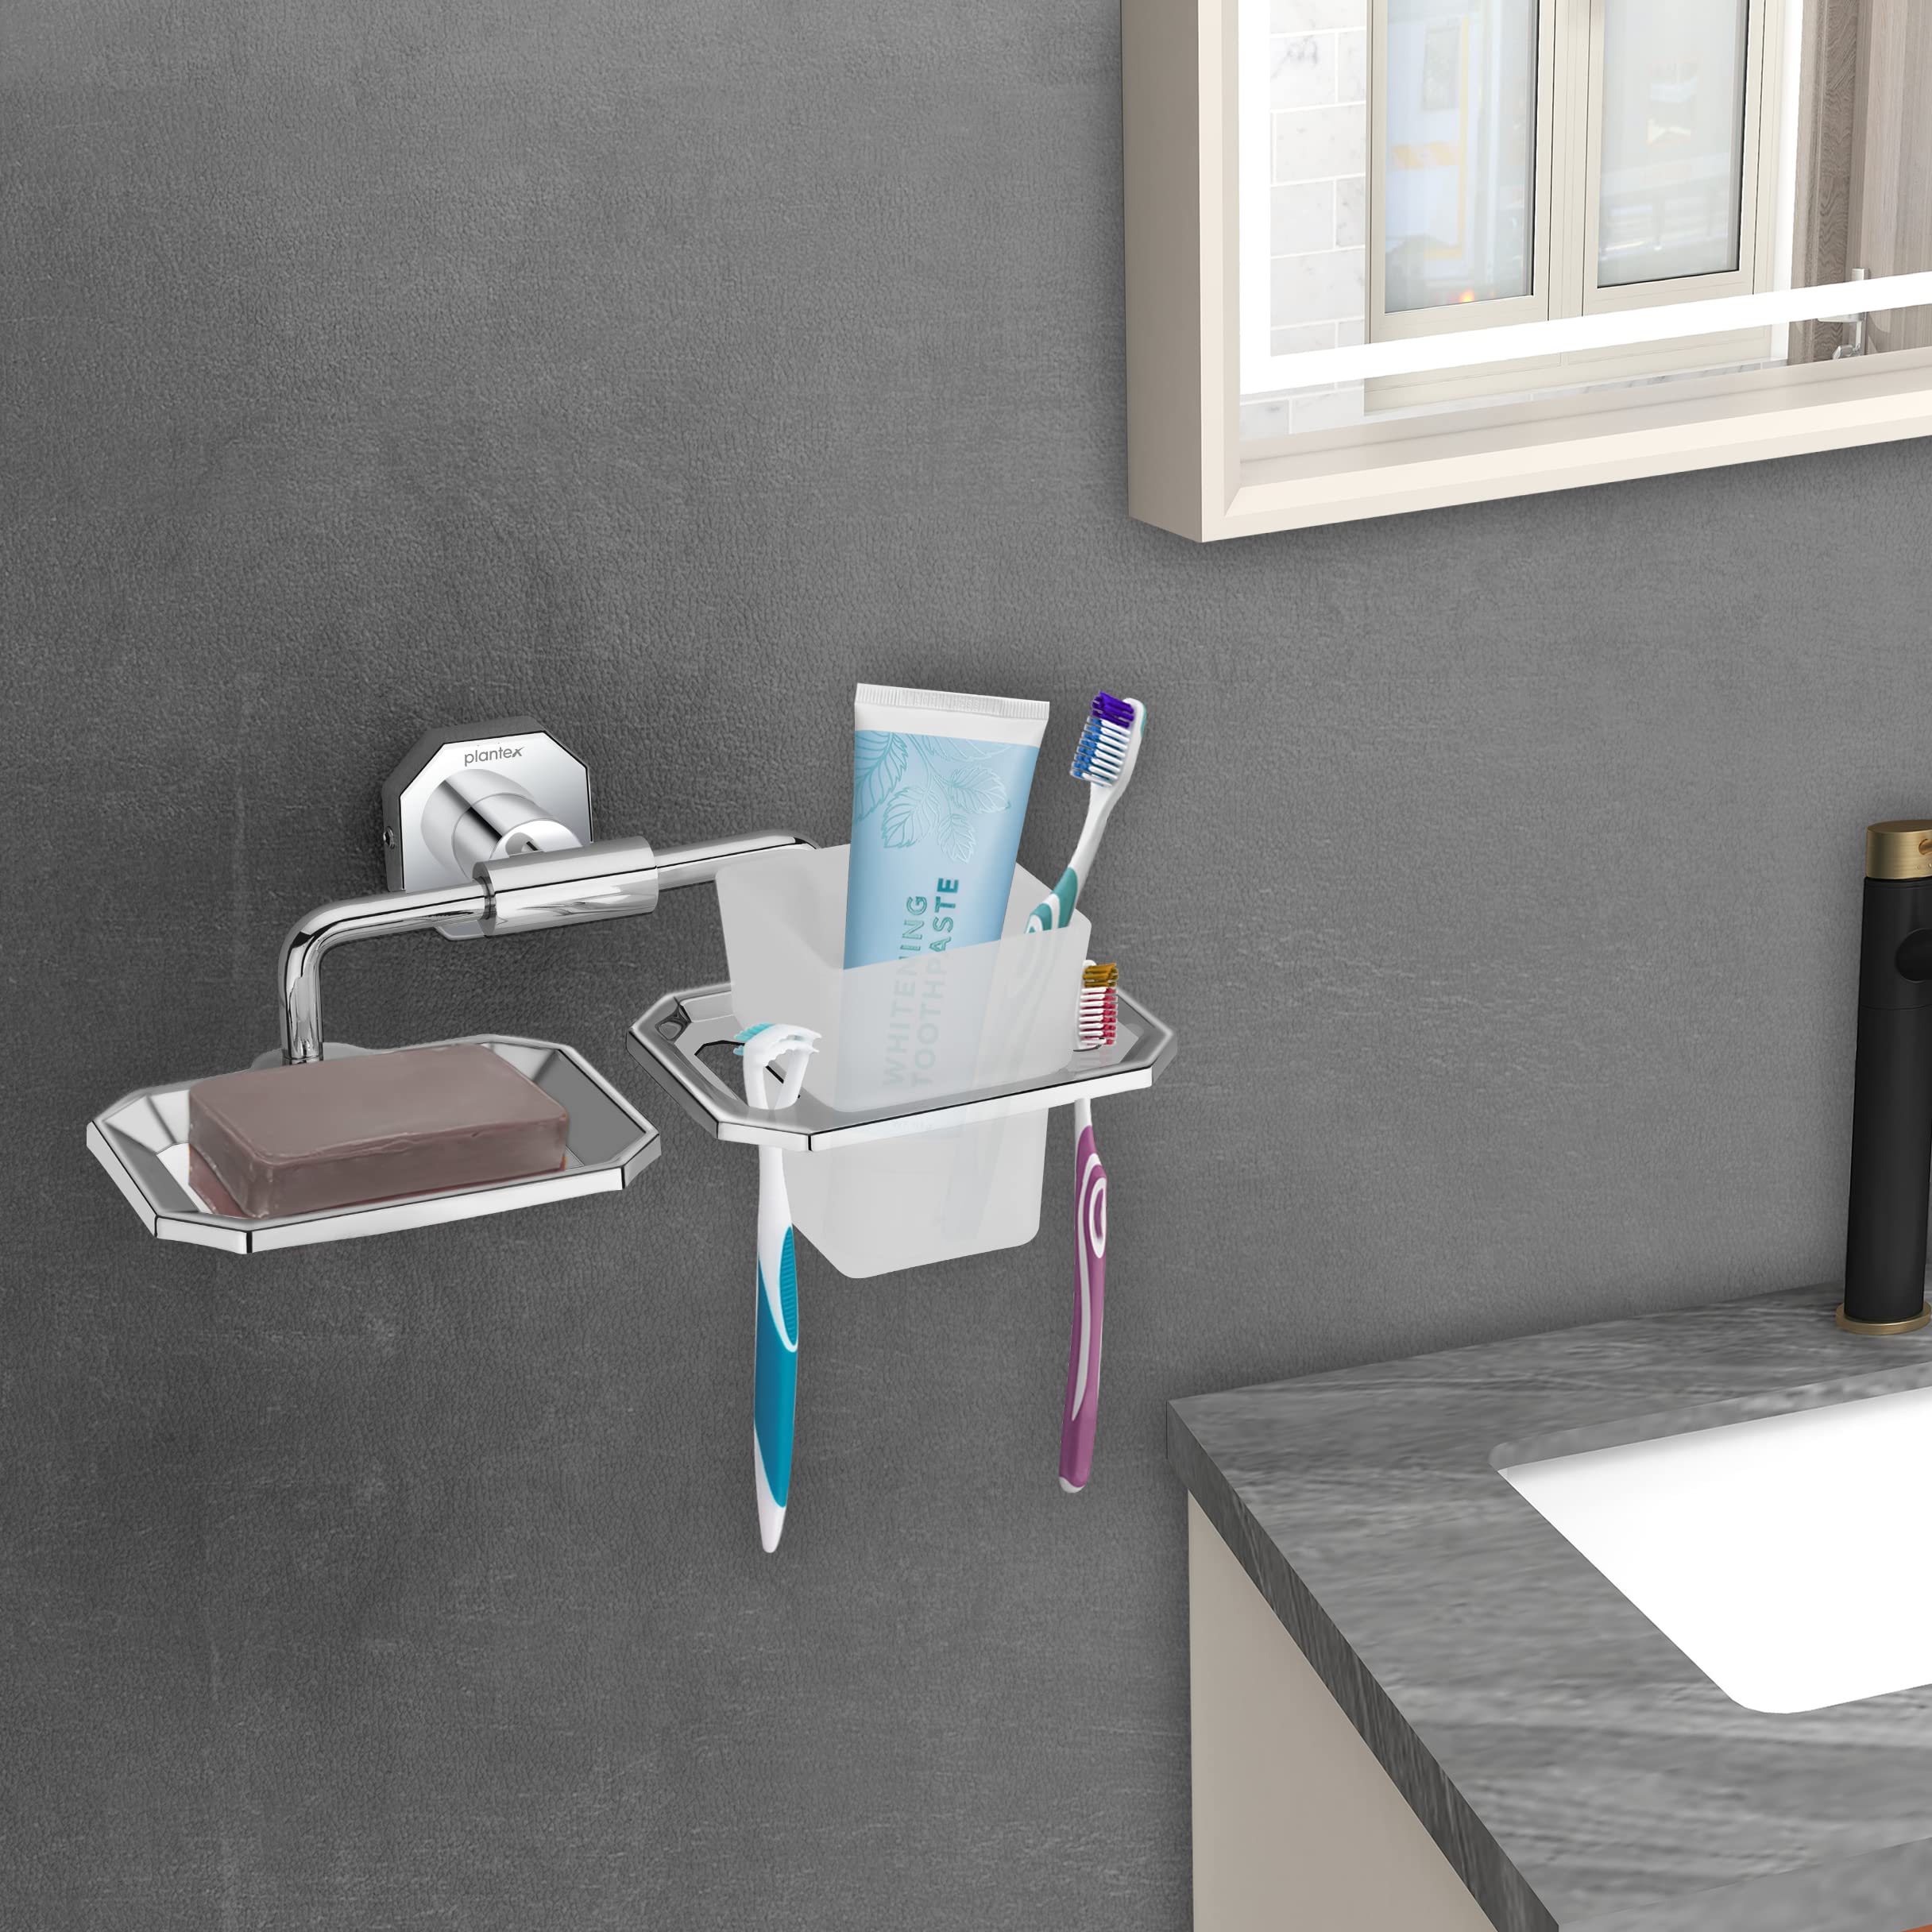 Plantex Nipron Bathroom soap Holder and Brush Stand for wash Basin (304 Stainless Steel)